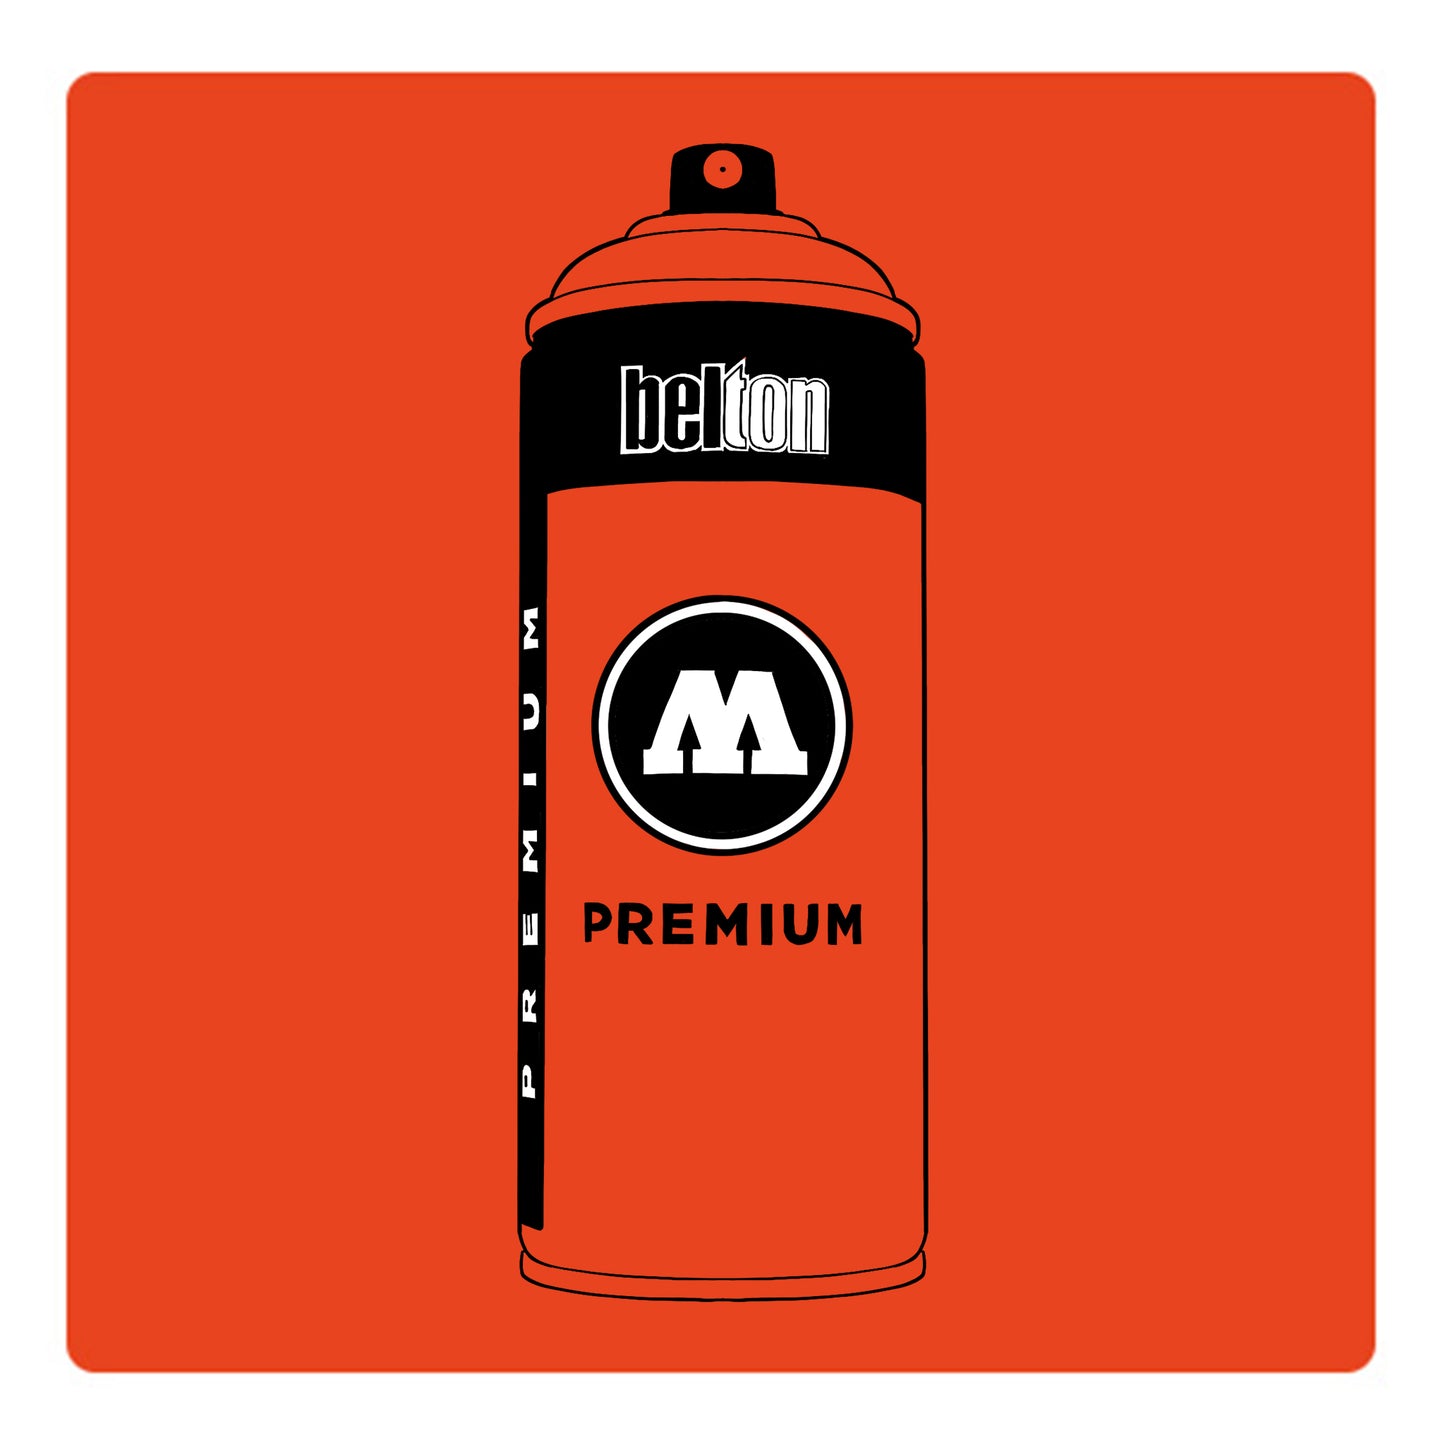 A black outline drawing of a red orange spray paint can with the words "belton","premium" and the letter"M" written on the face in black and white font. The background is a color swatch of the same red orange with a white border.